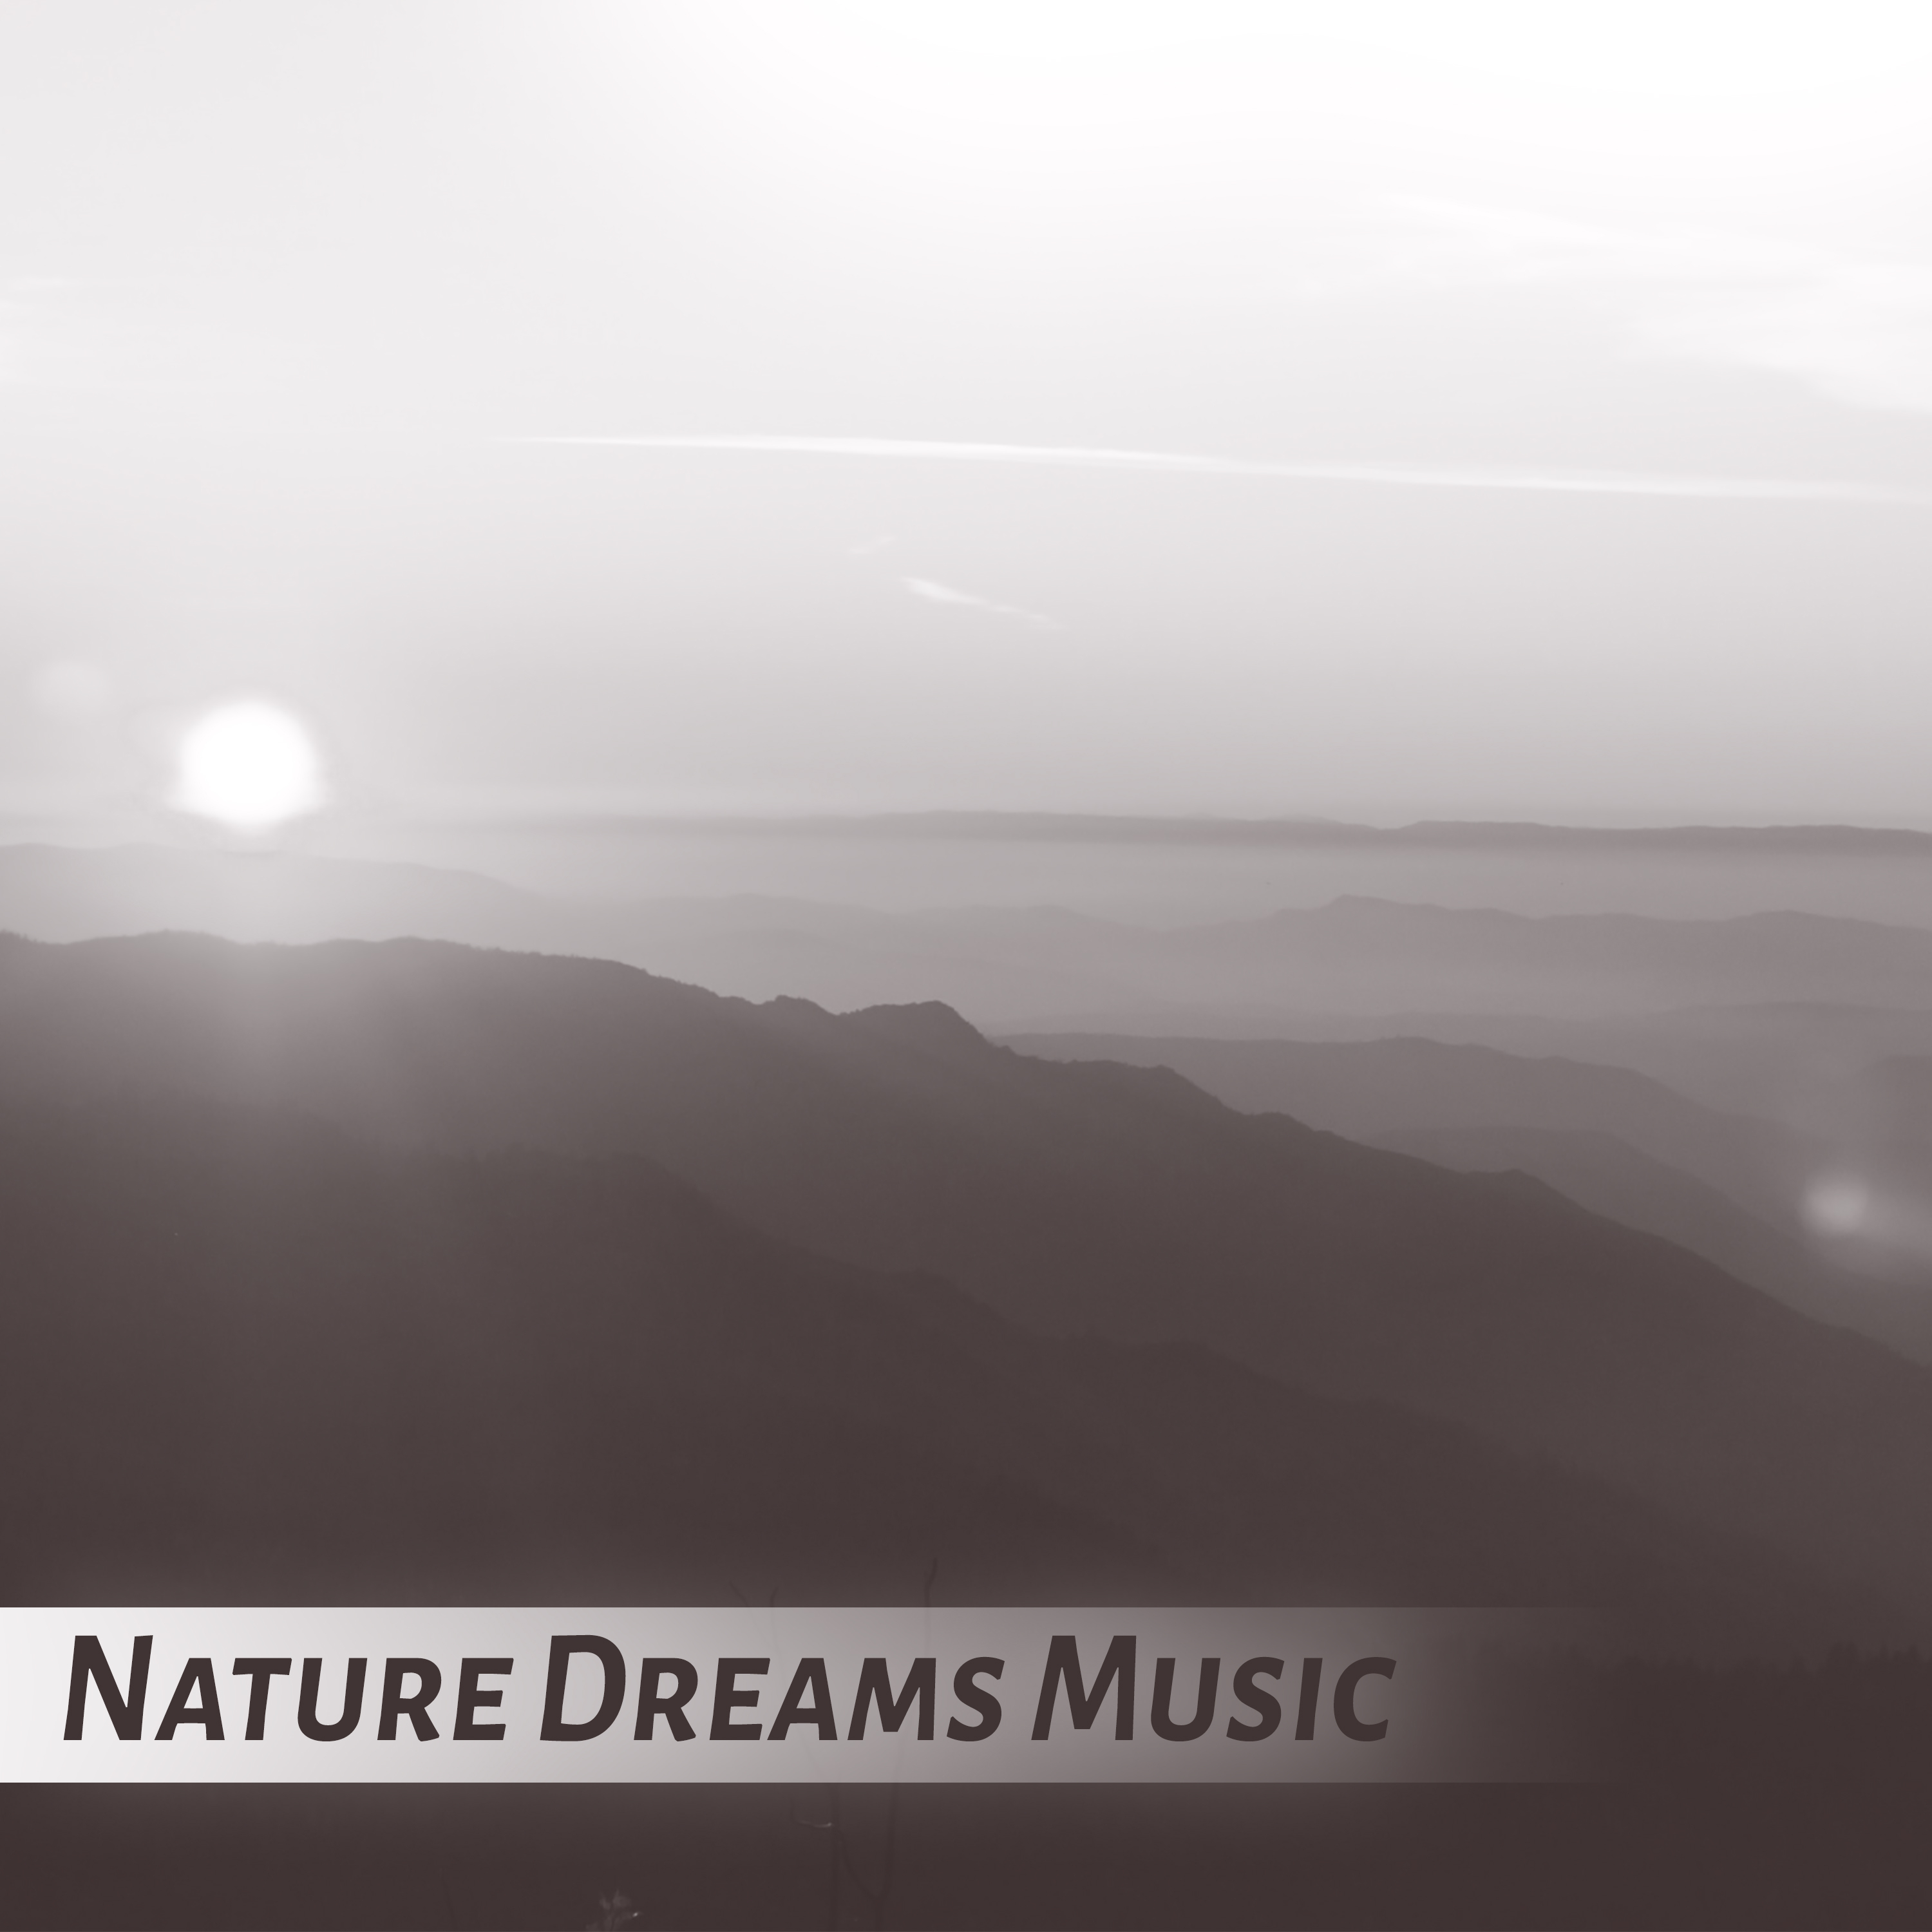 Nature Dreams Music - Inspiring Music for Relaxation, Concentration, Meditation and Focus on Learning, Instrumental Relaxing music for Reading, Background Calm Music